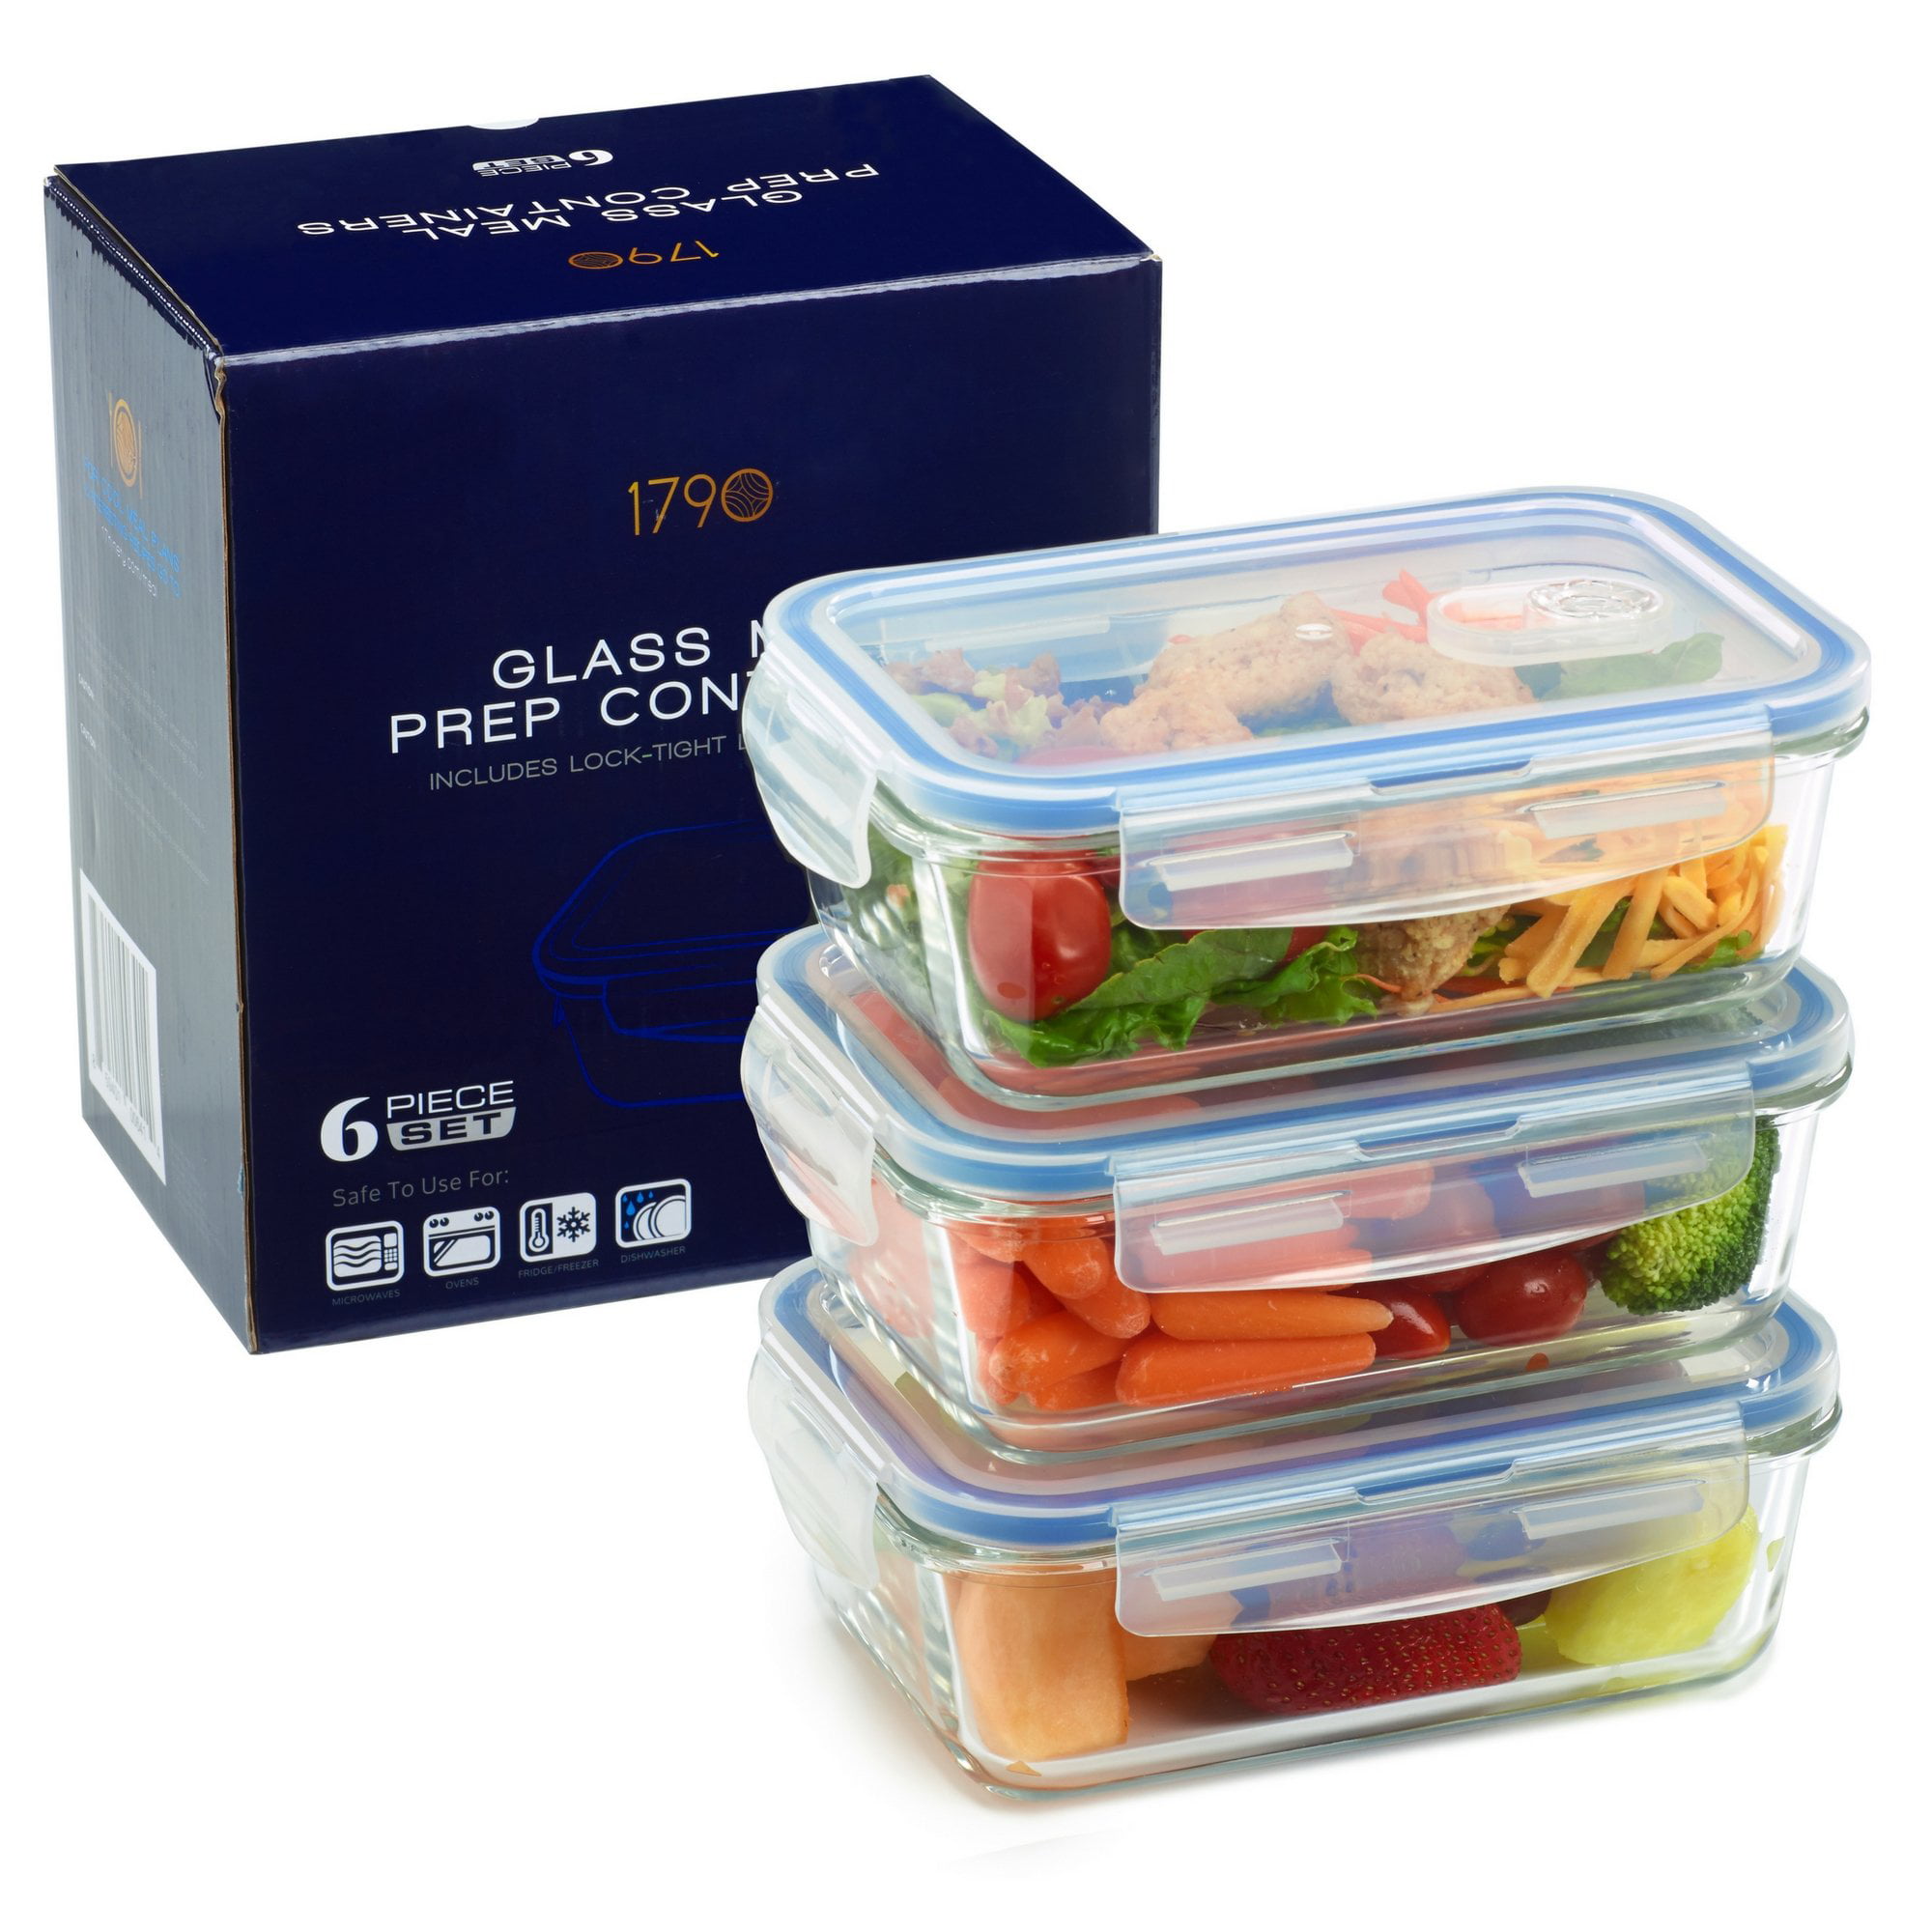 FineDine Glass Meal Prep Containers with Lids - Set of 3 Square 28 Oz  Containers - Airtight, Leakproof, Microwave & Dishwasher Safe - Perfect for